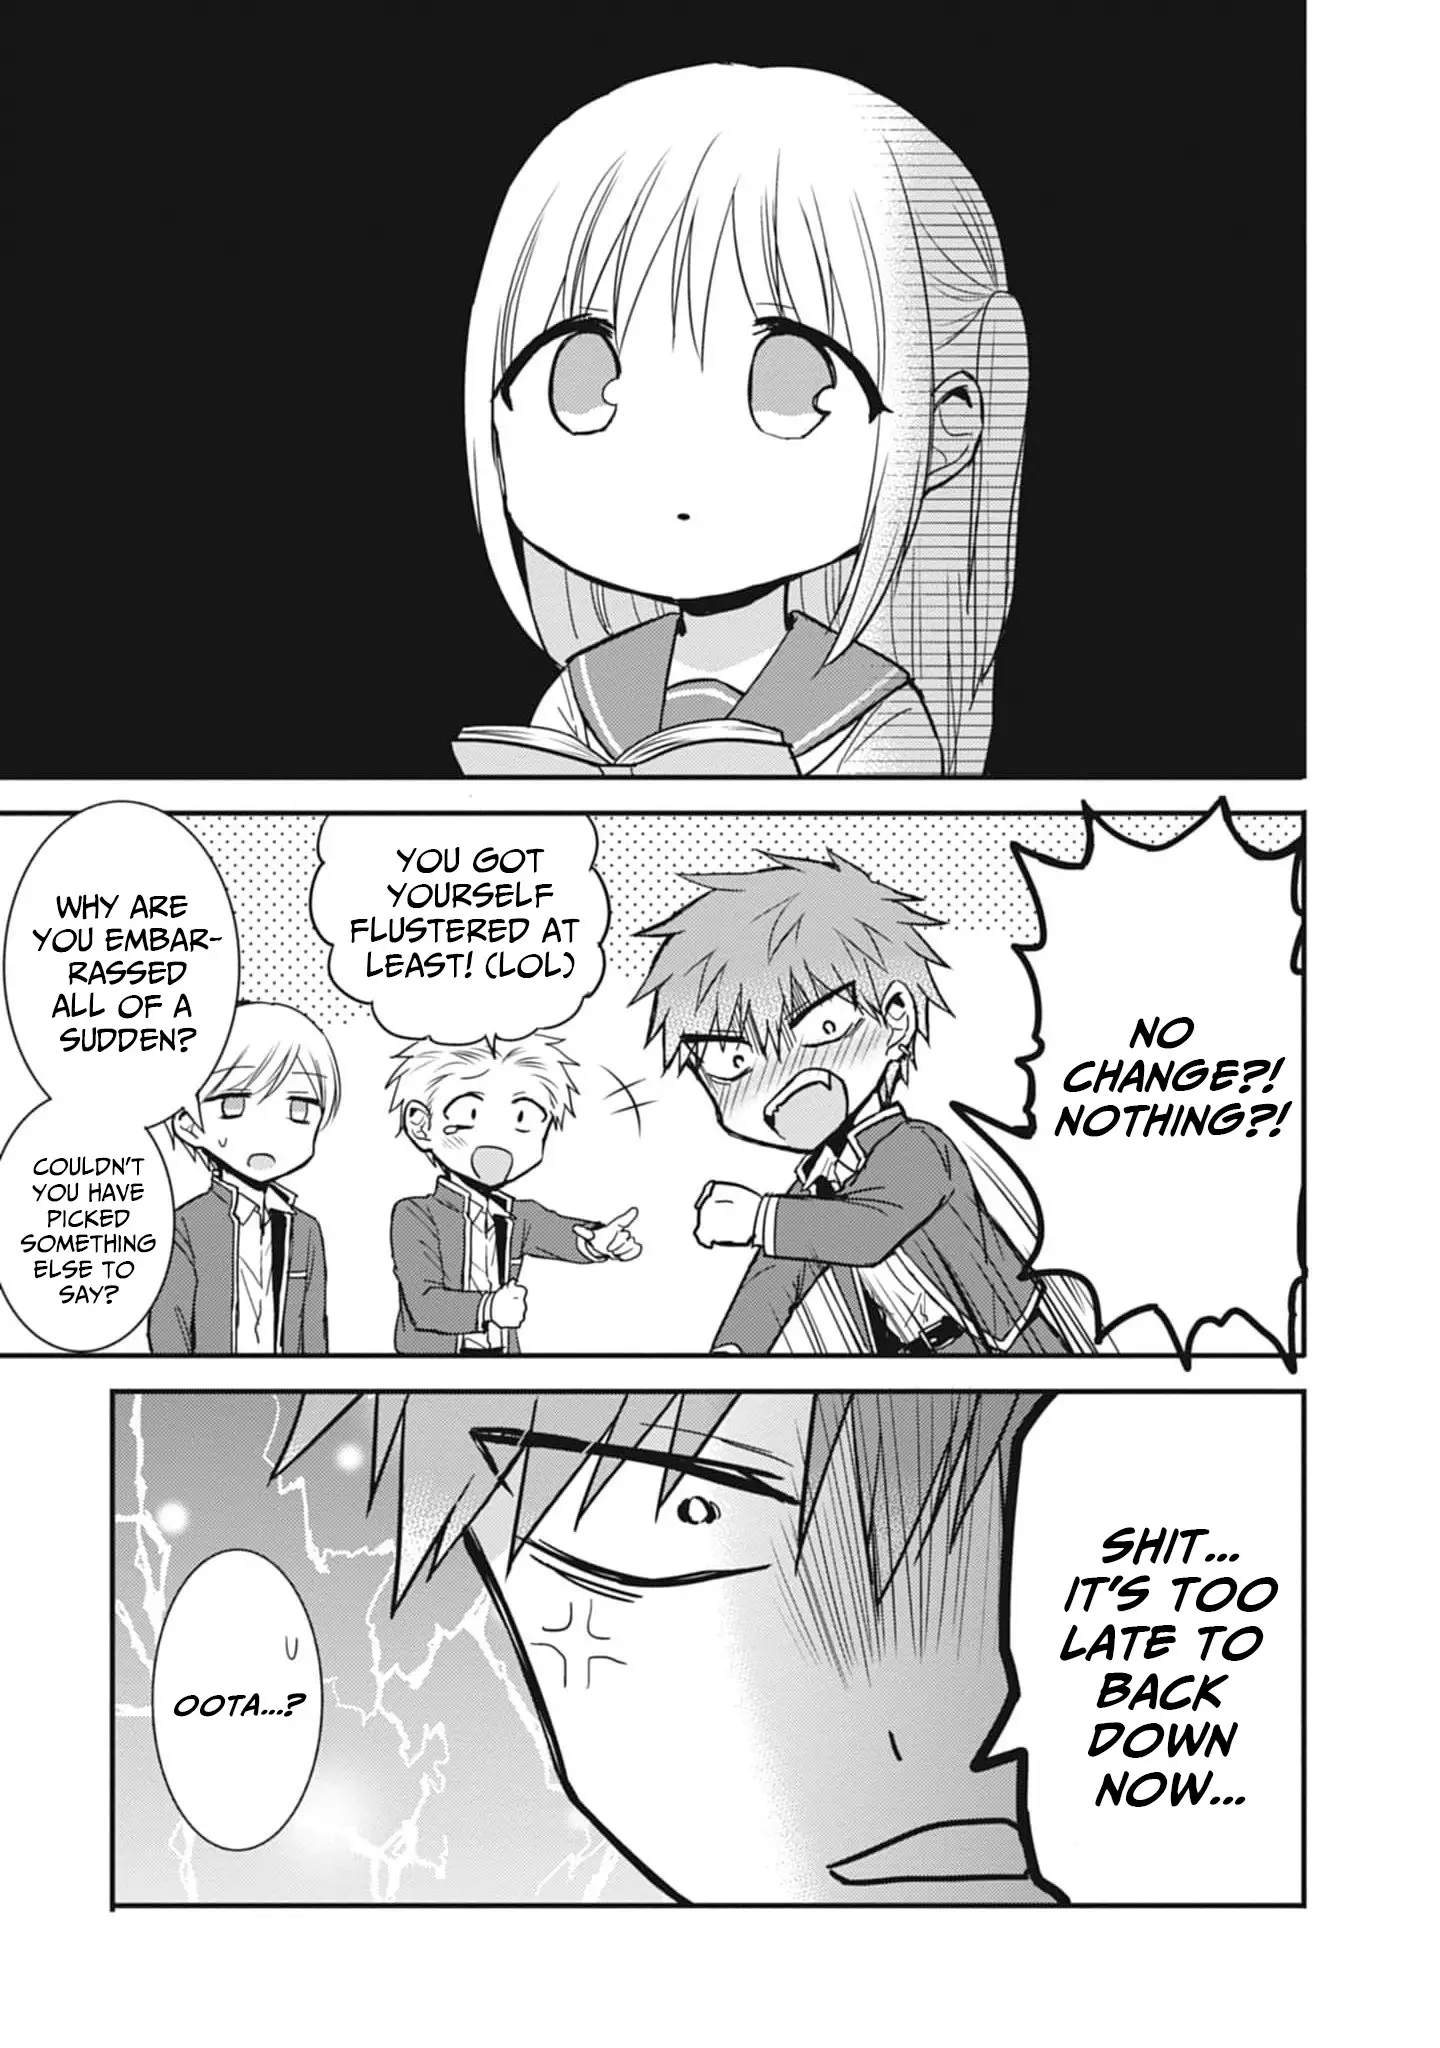 Expressionless Face Girl And Emotional Face Boy - 79 page 4-44258bea